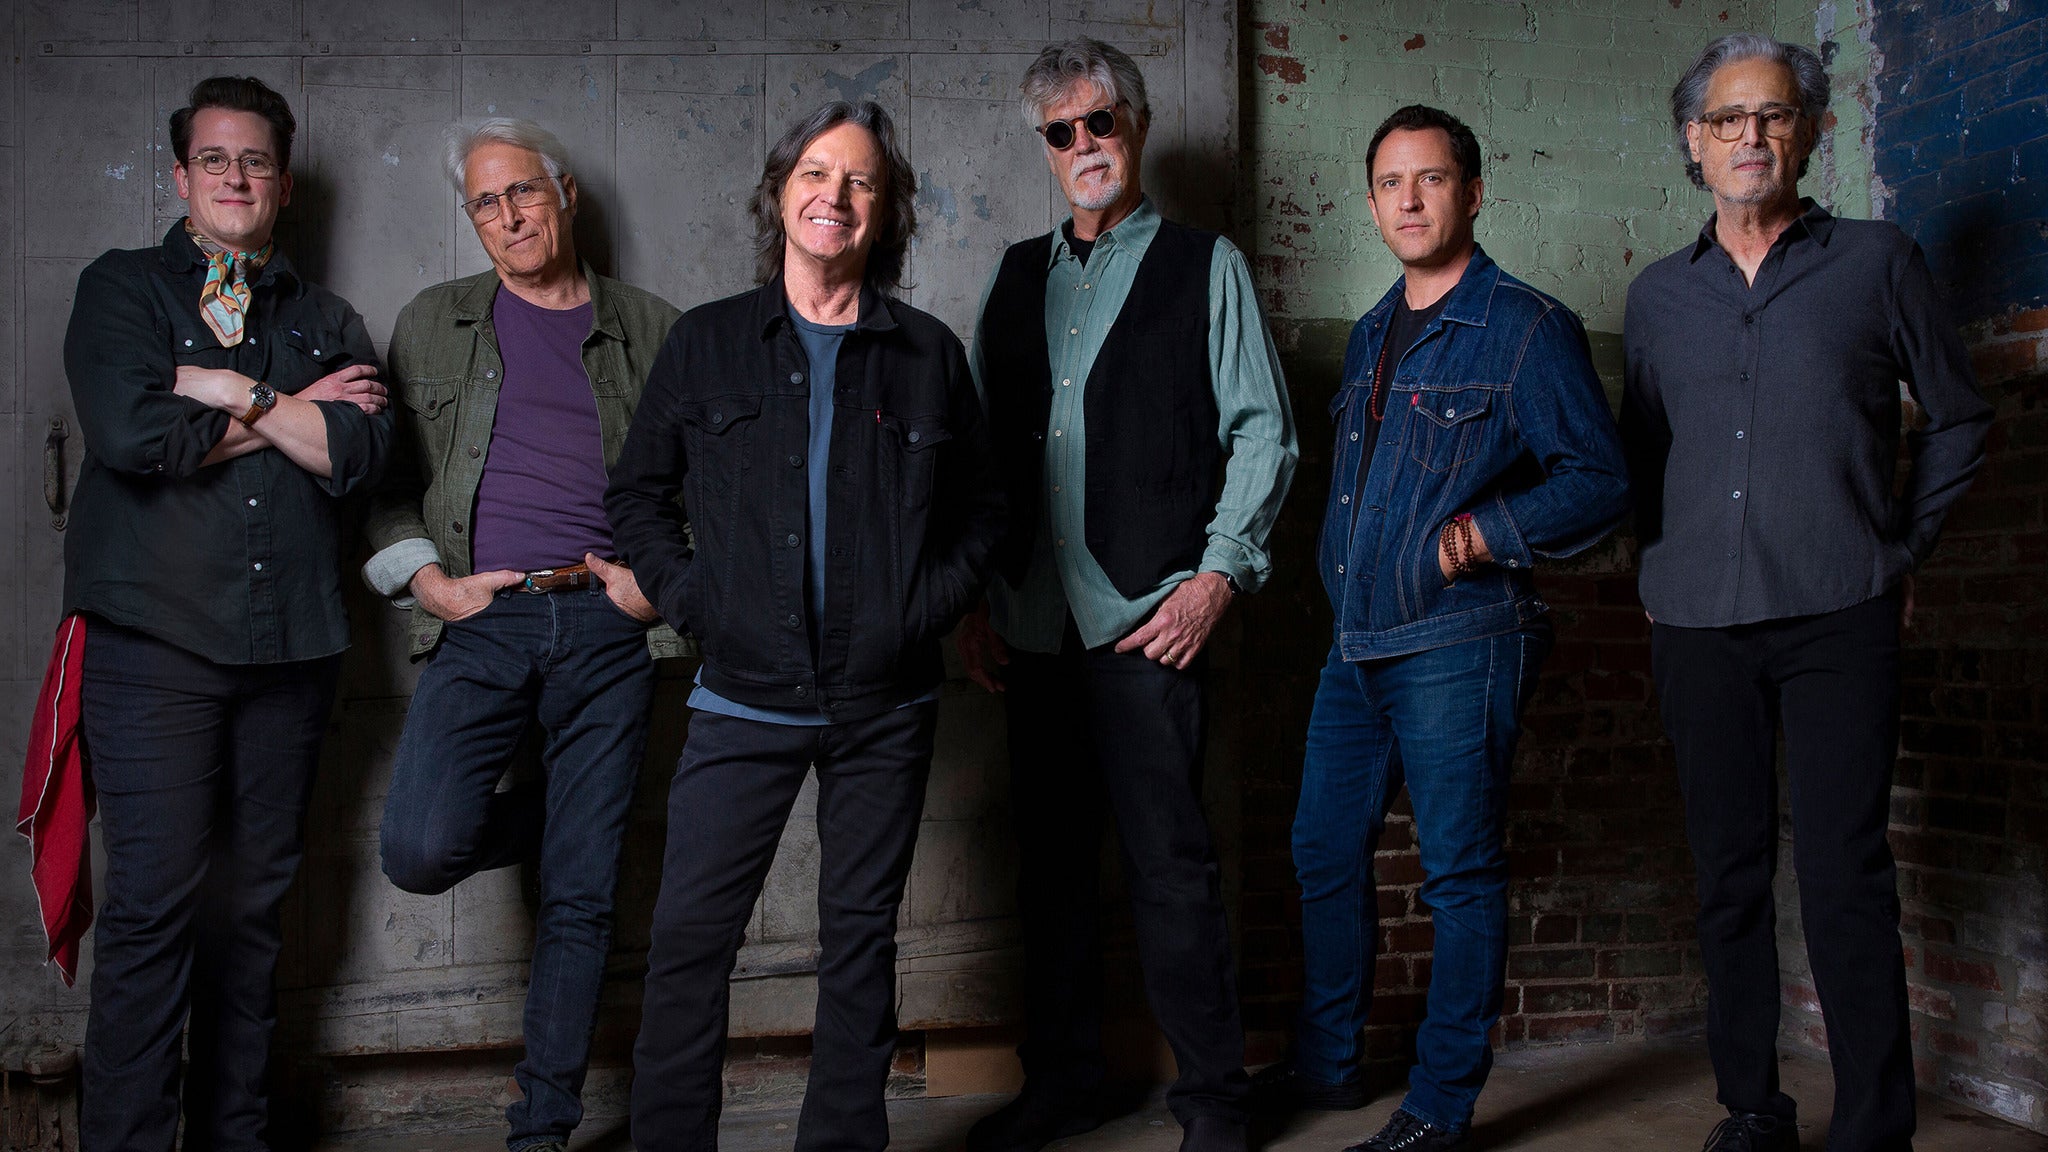 Nitty Gritty Dirt Band at Thrasher-Horne Center for the Arts